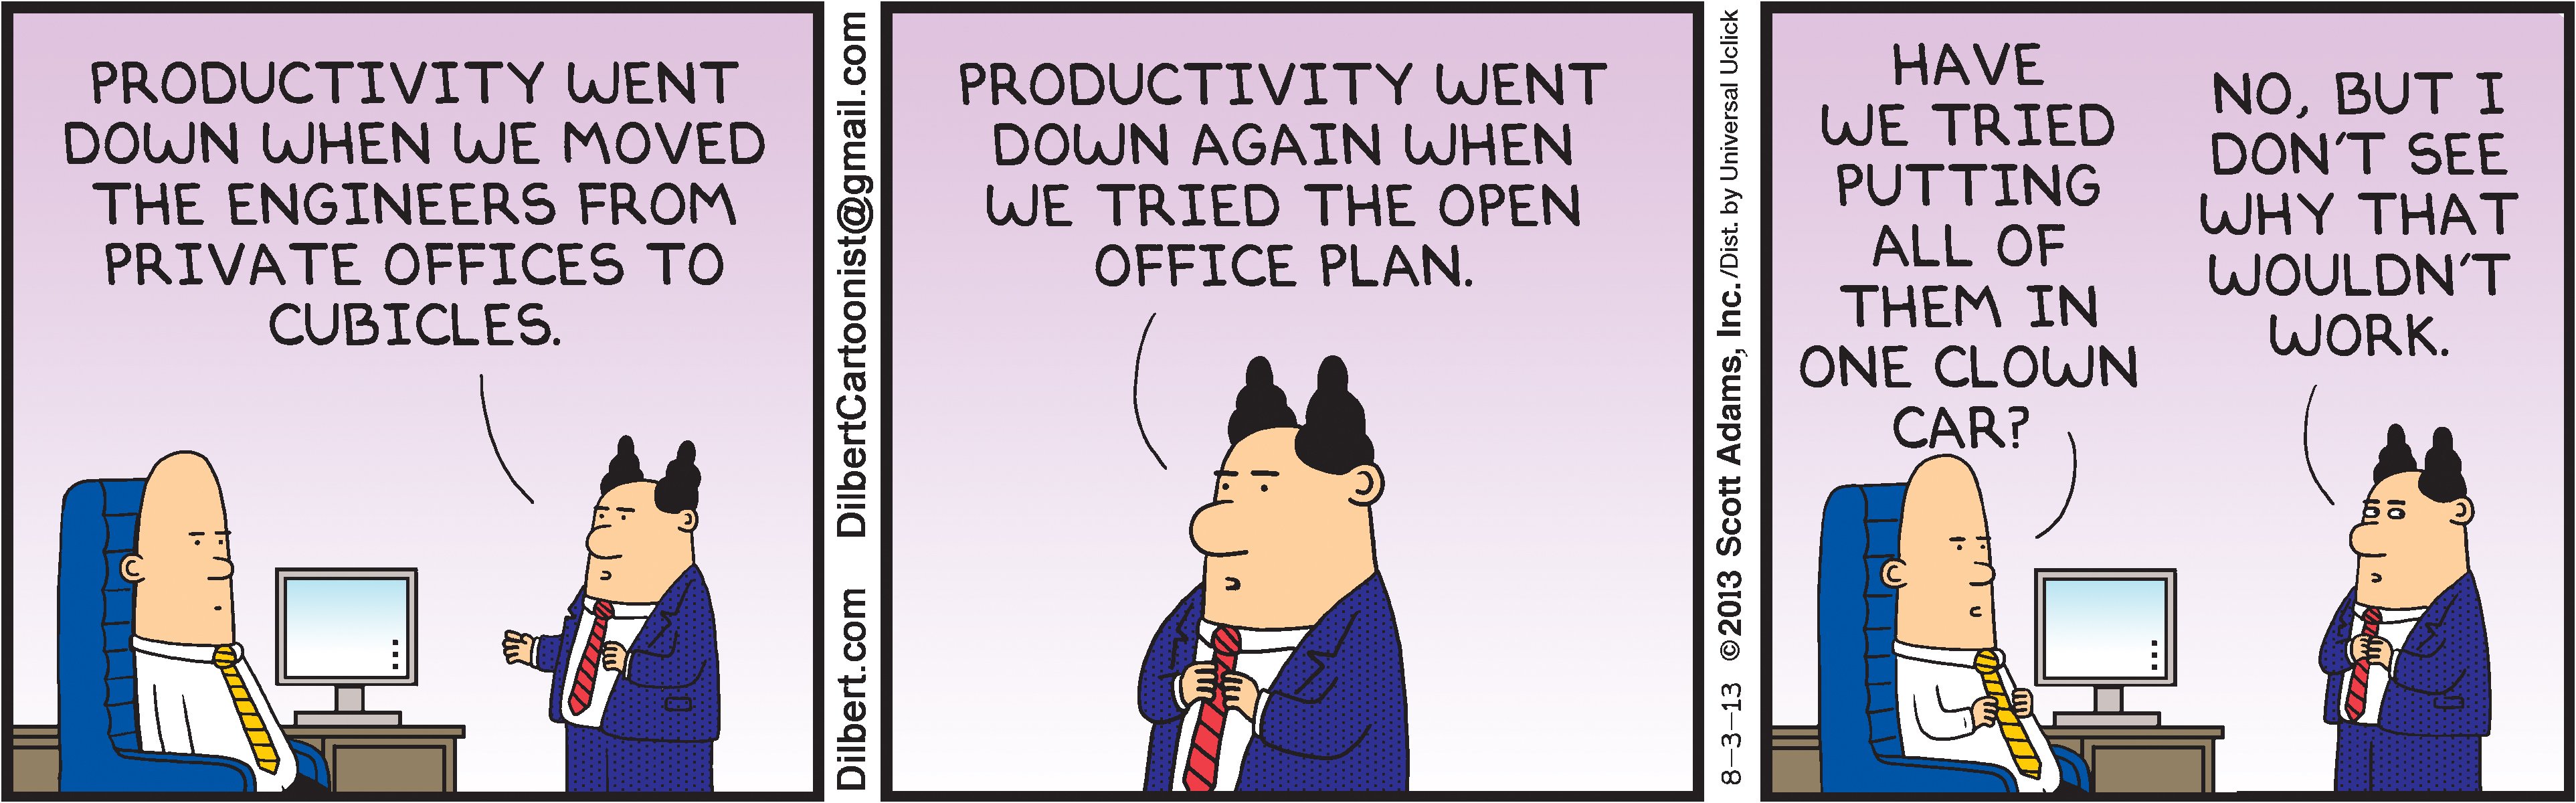 Dilbert cartoon illustrating how terrible an open office space plan is.